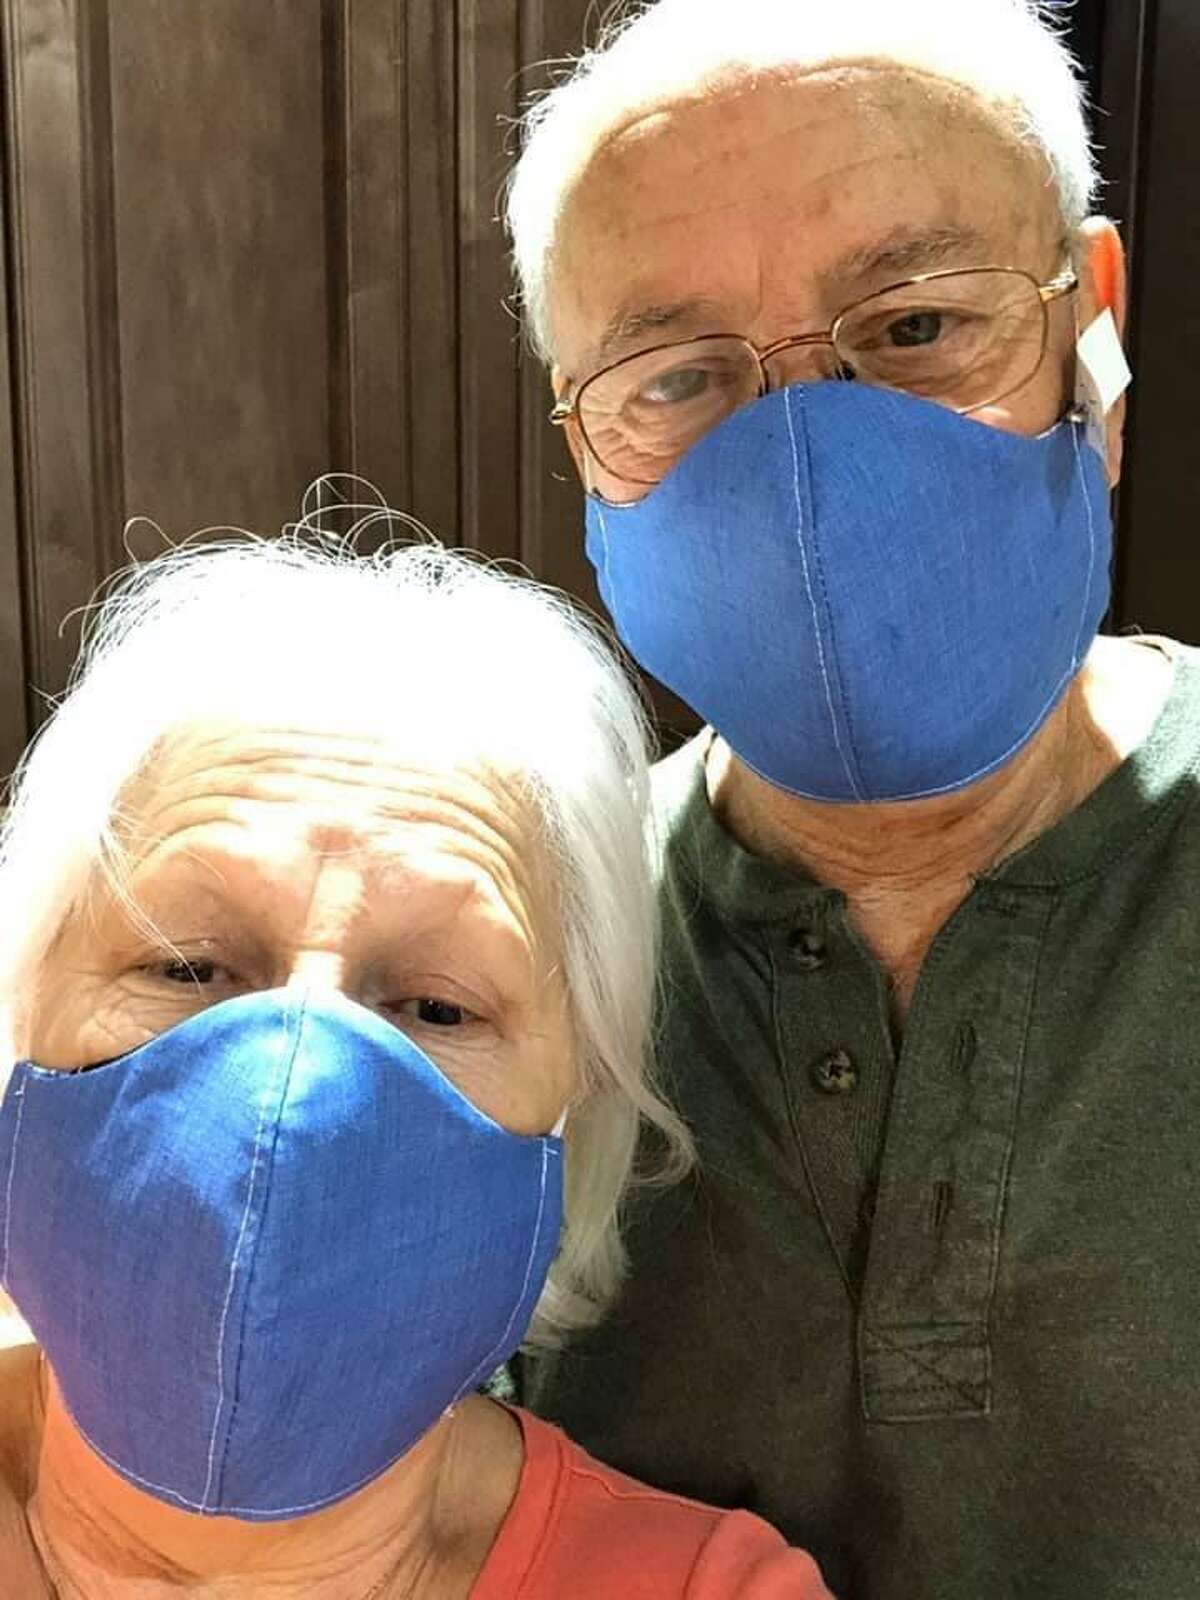 Graystone Hills resident Gena Reyna is a sewing enthusiast and she has made masks for the seniors and other vulnerable members of her neighborhood in Conroe's Graystone Hills community. Pictured her are two of the masks she made and gave to seniors in her neighborhood.